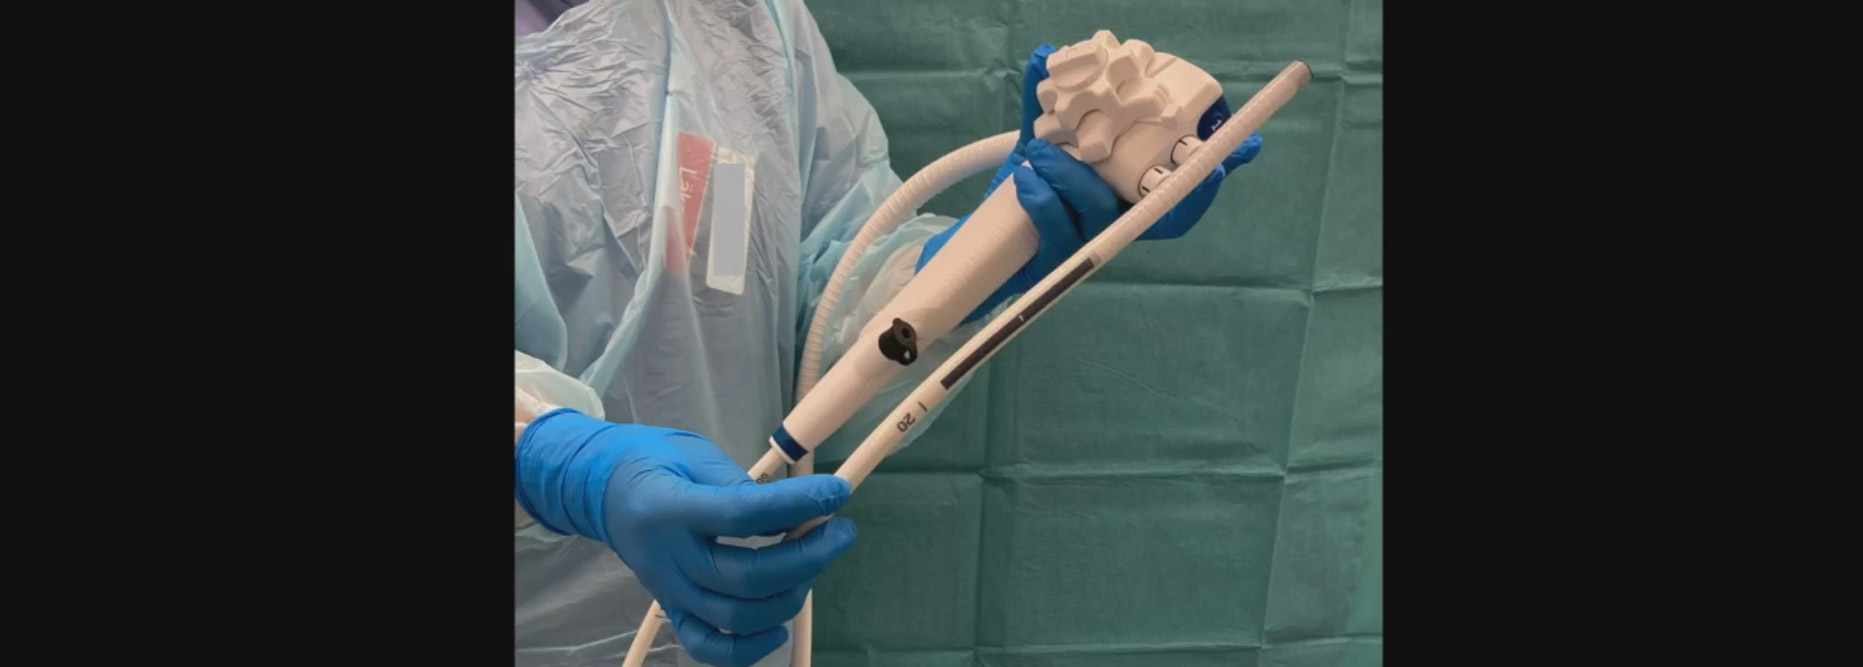 Study Finds Single-Use Gastroscopes Effective in Advanced Procedures